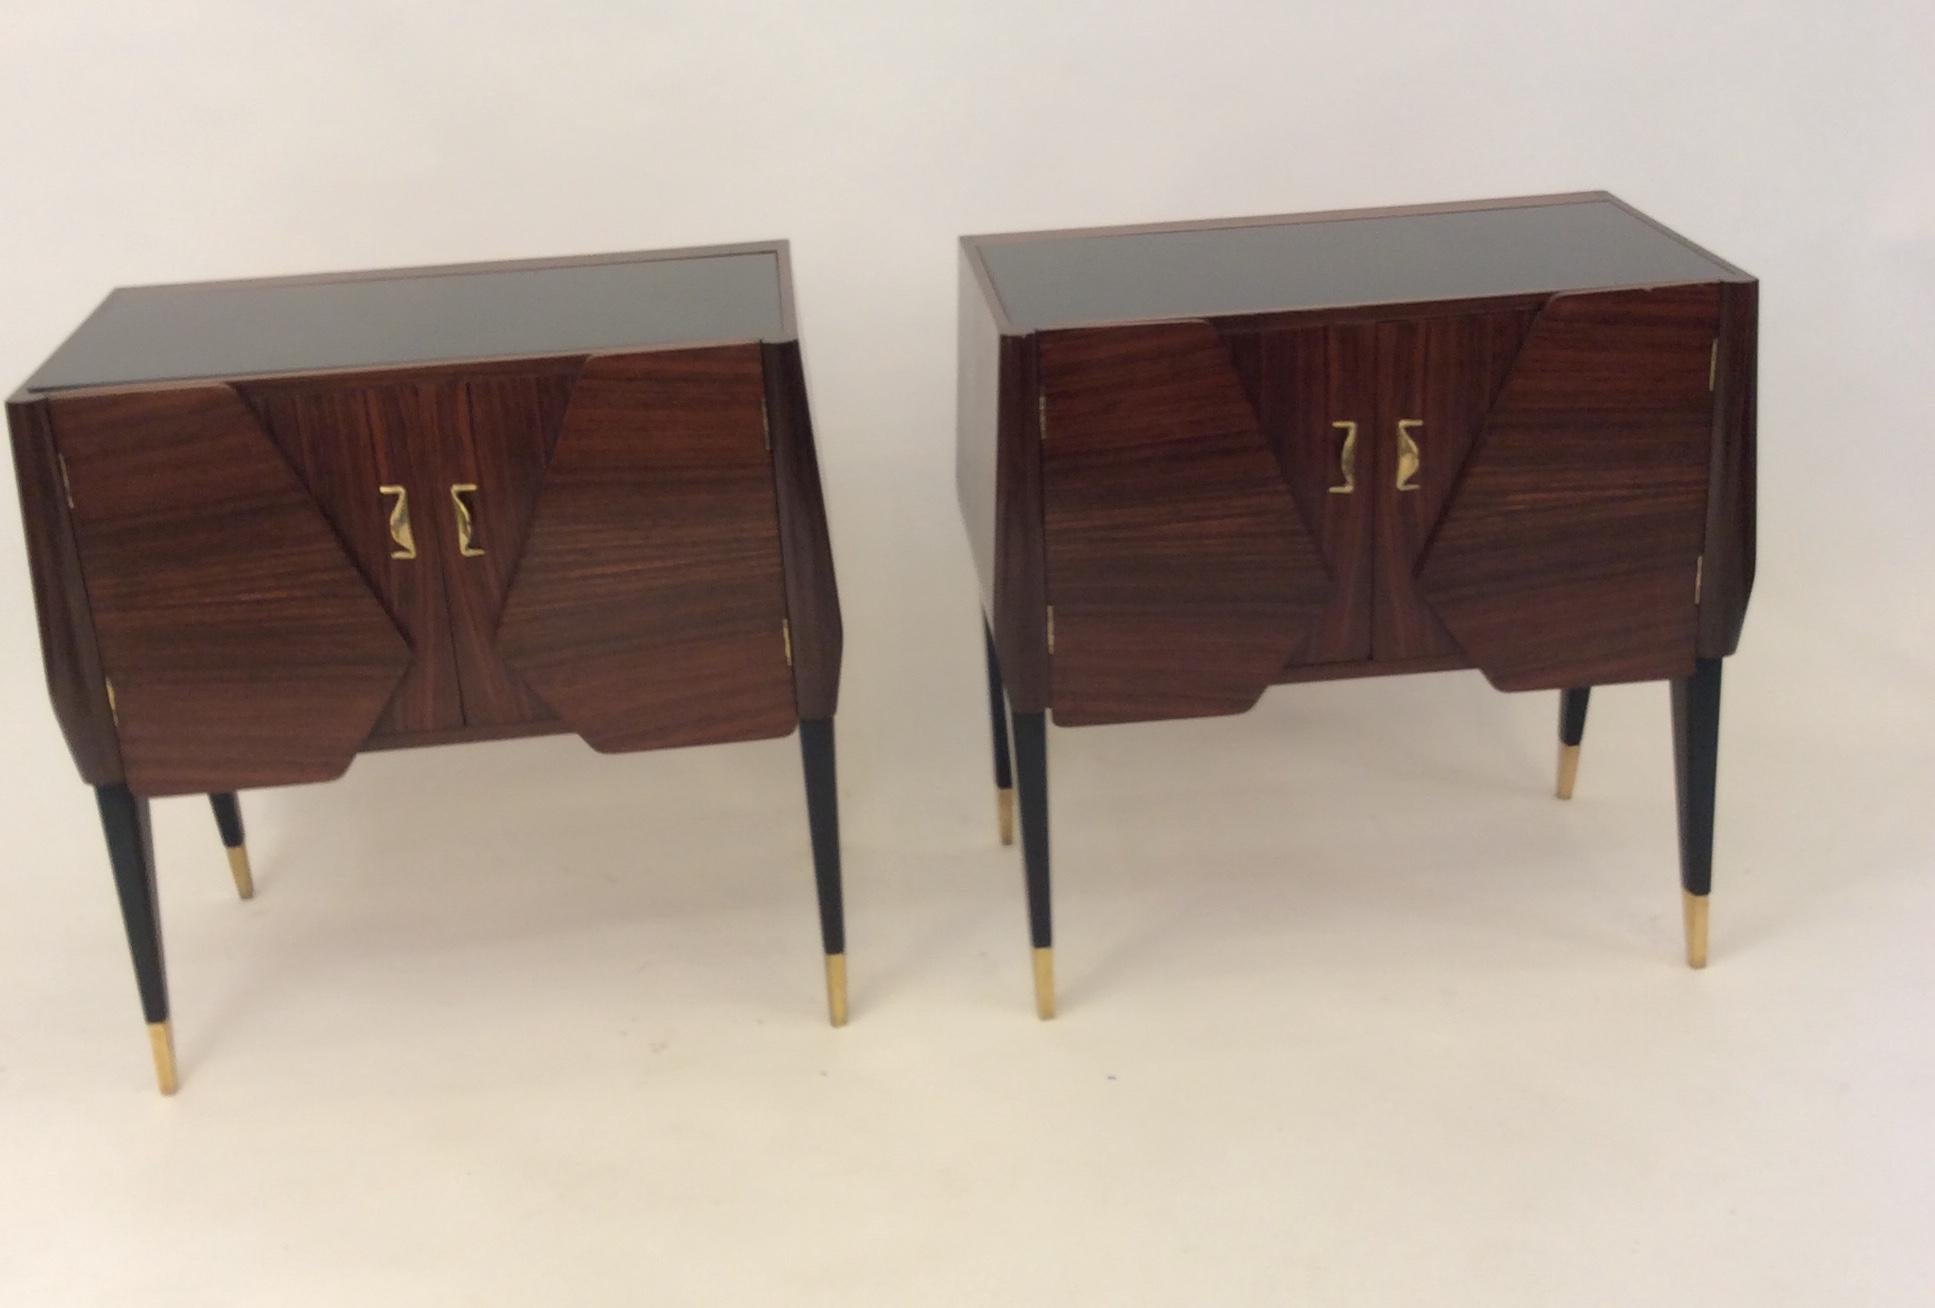 A beautiful pair of nightstands/side tables in mahogany veneer with brass hardware.